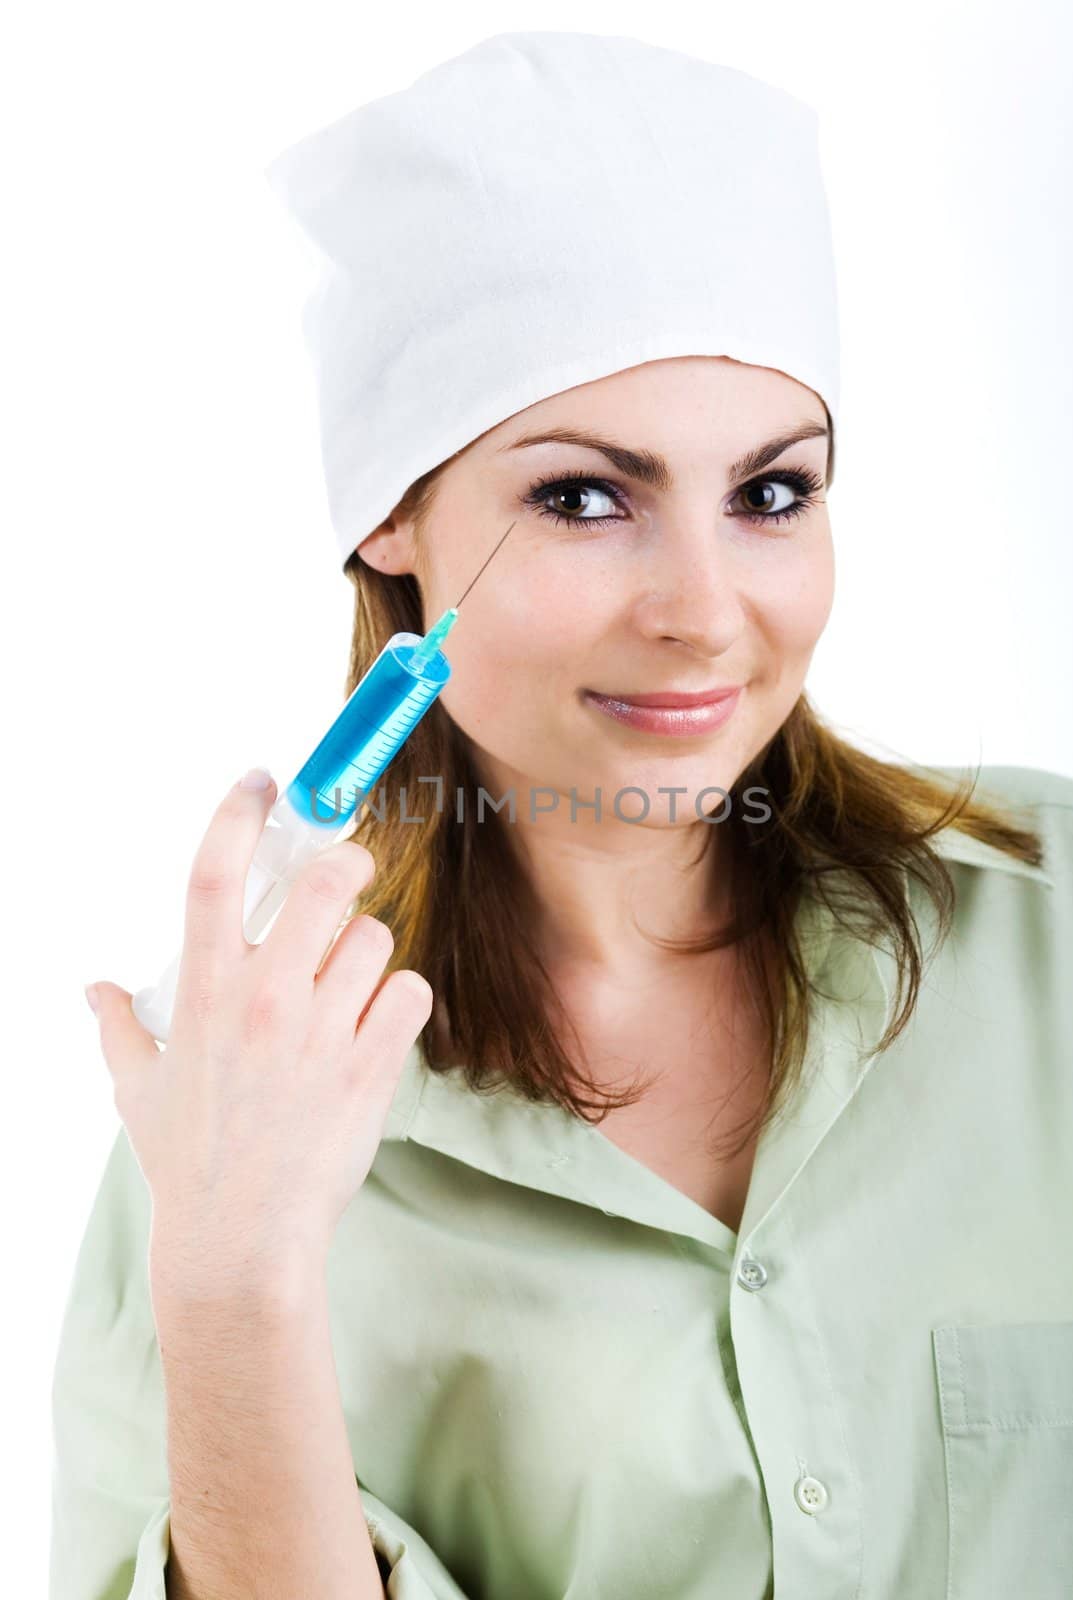 An image of nice woman with an injection